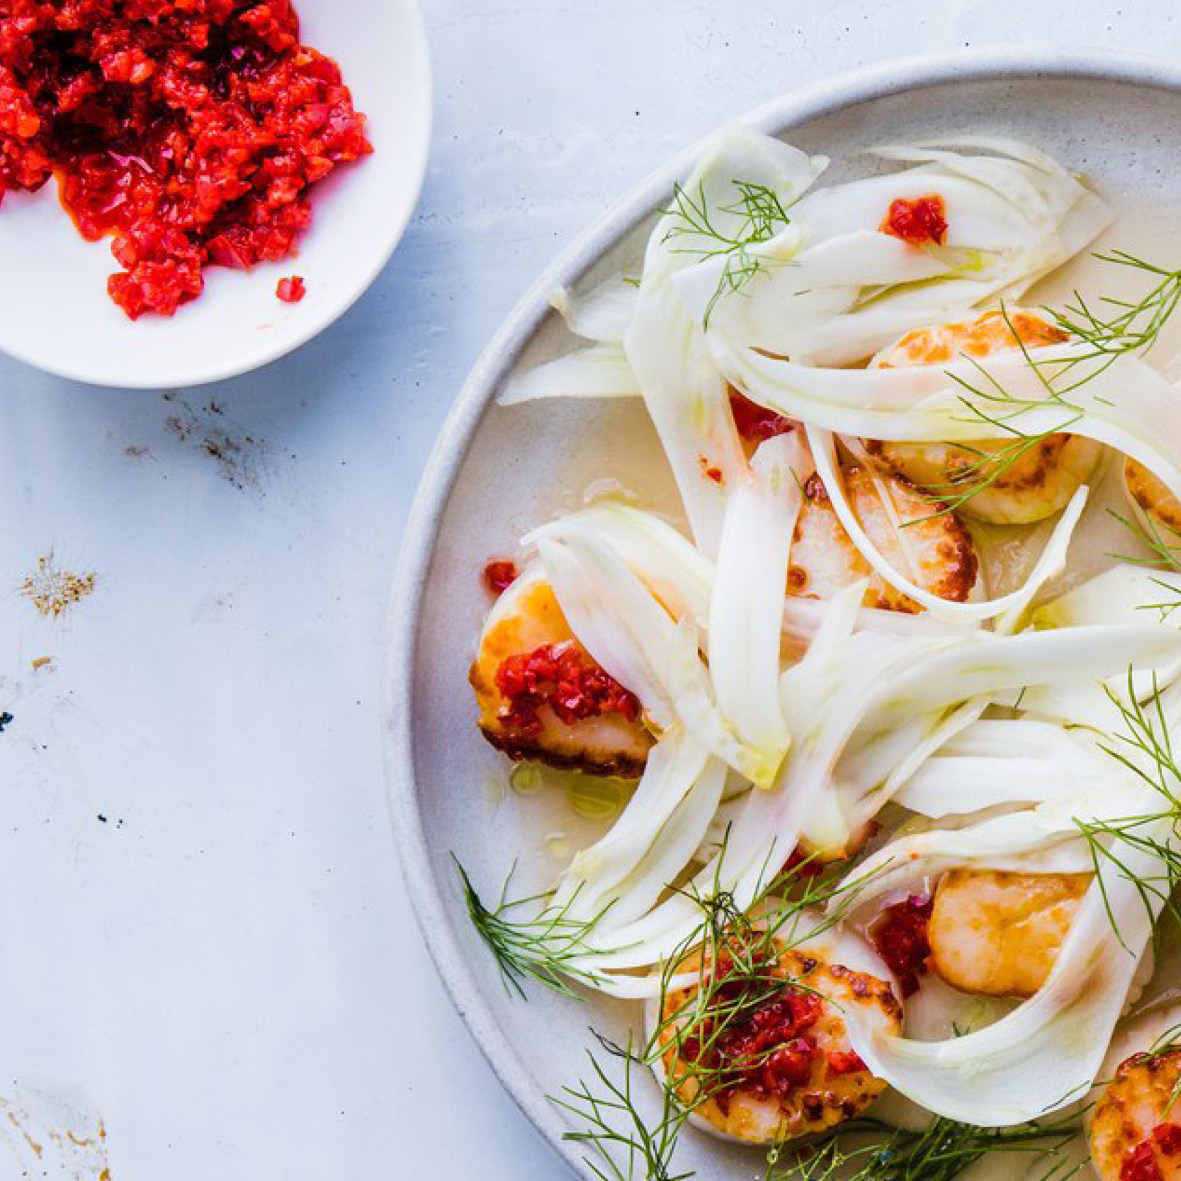 seared scallops with red chile paste and fennel salad.jpg